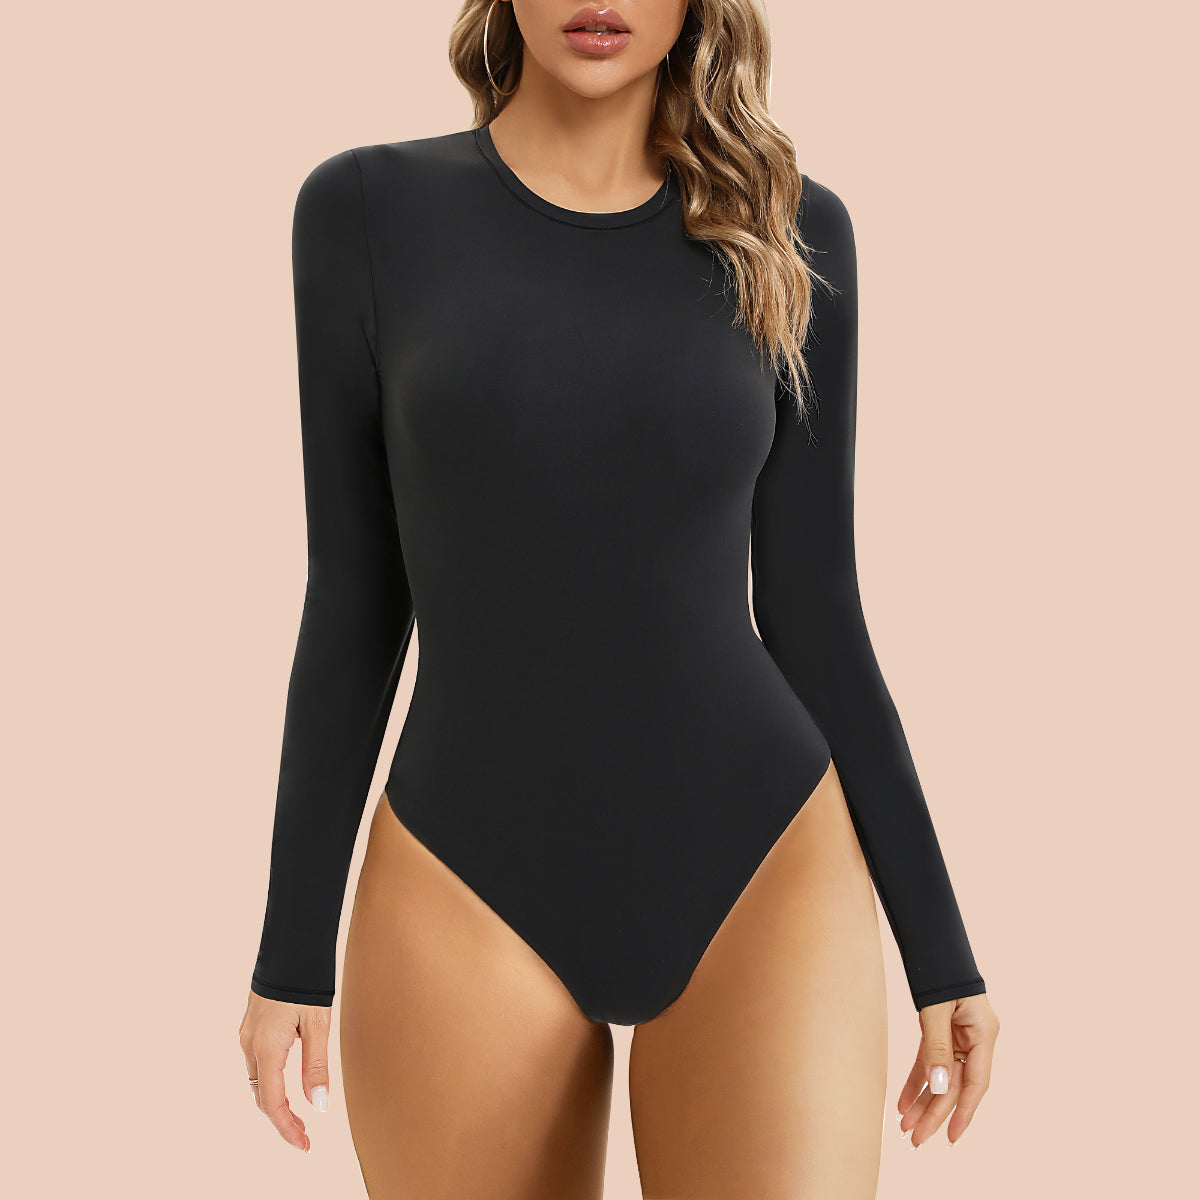 Nuuds Black Long Sleeve Bodysuit (Size XL) Crew Neck Stretch Fitted Thong  Style